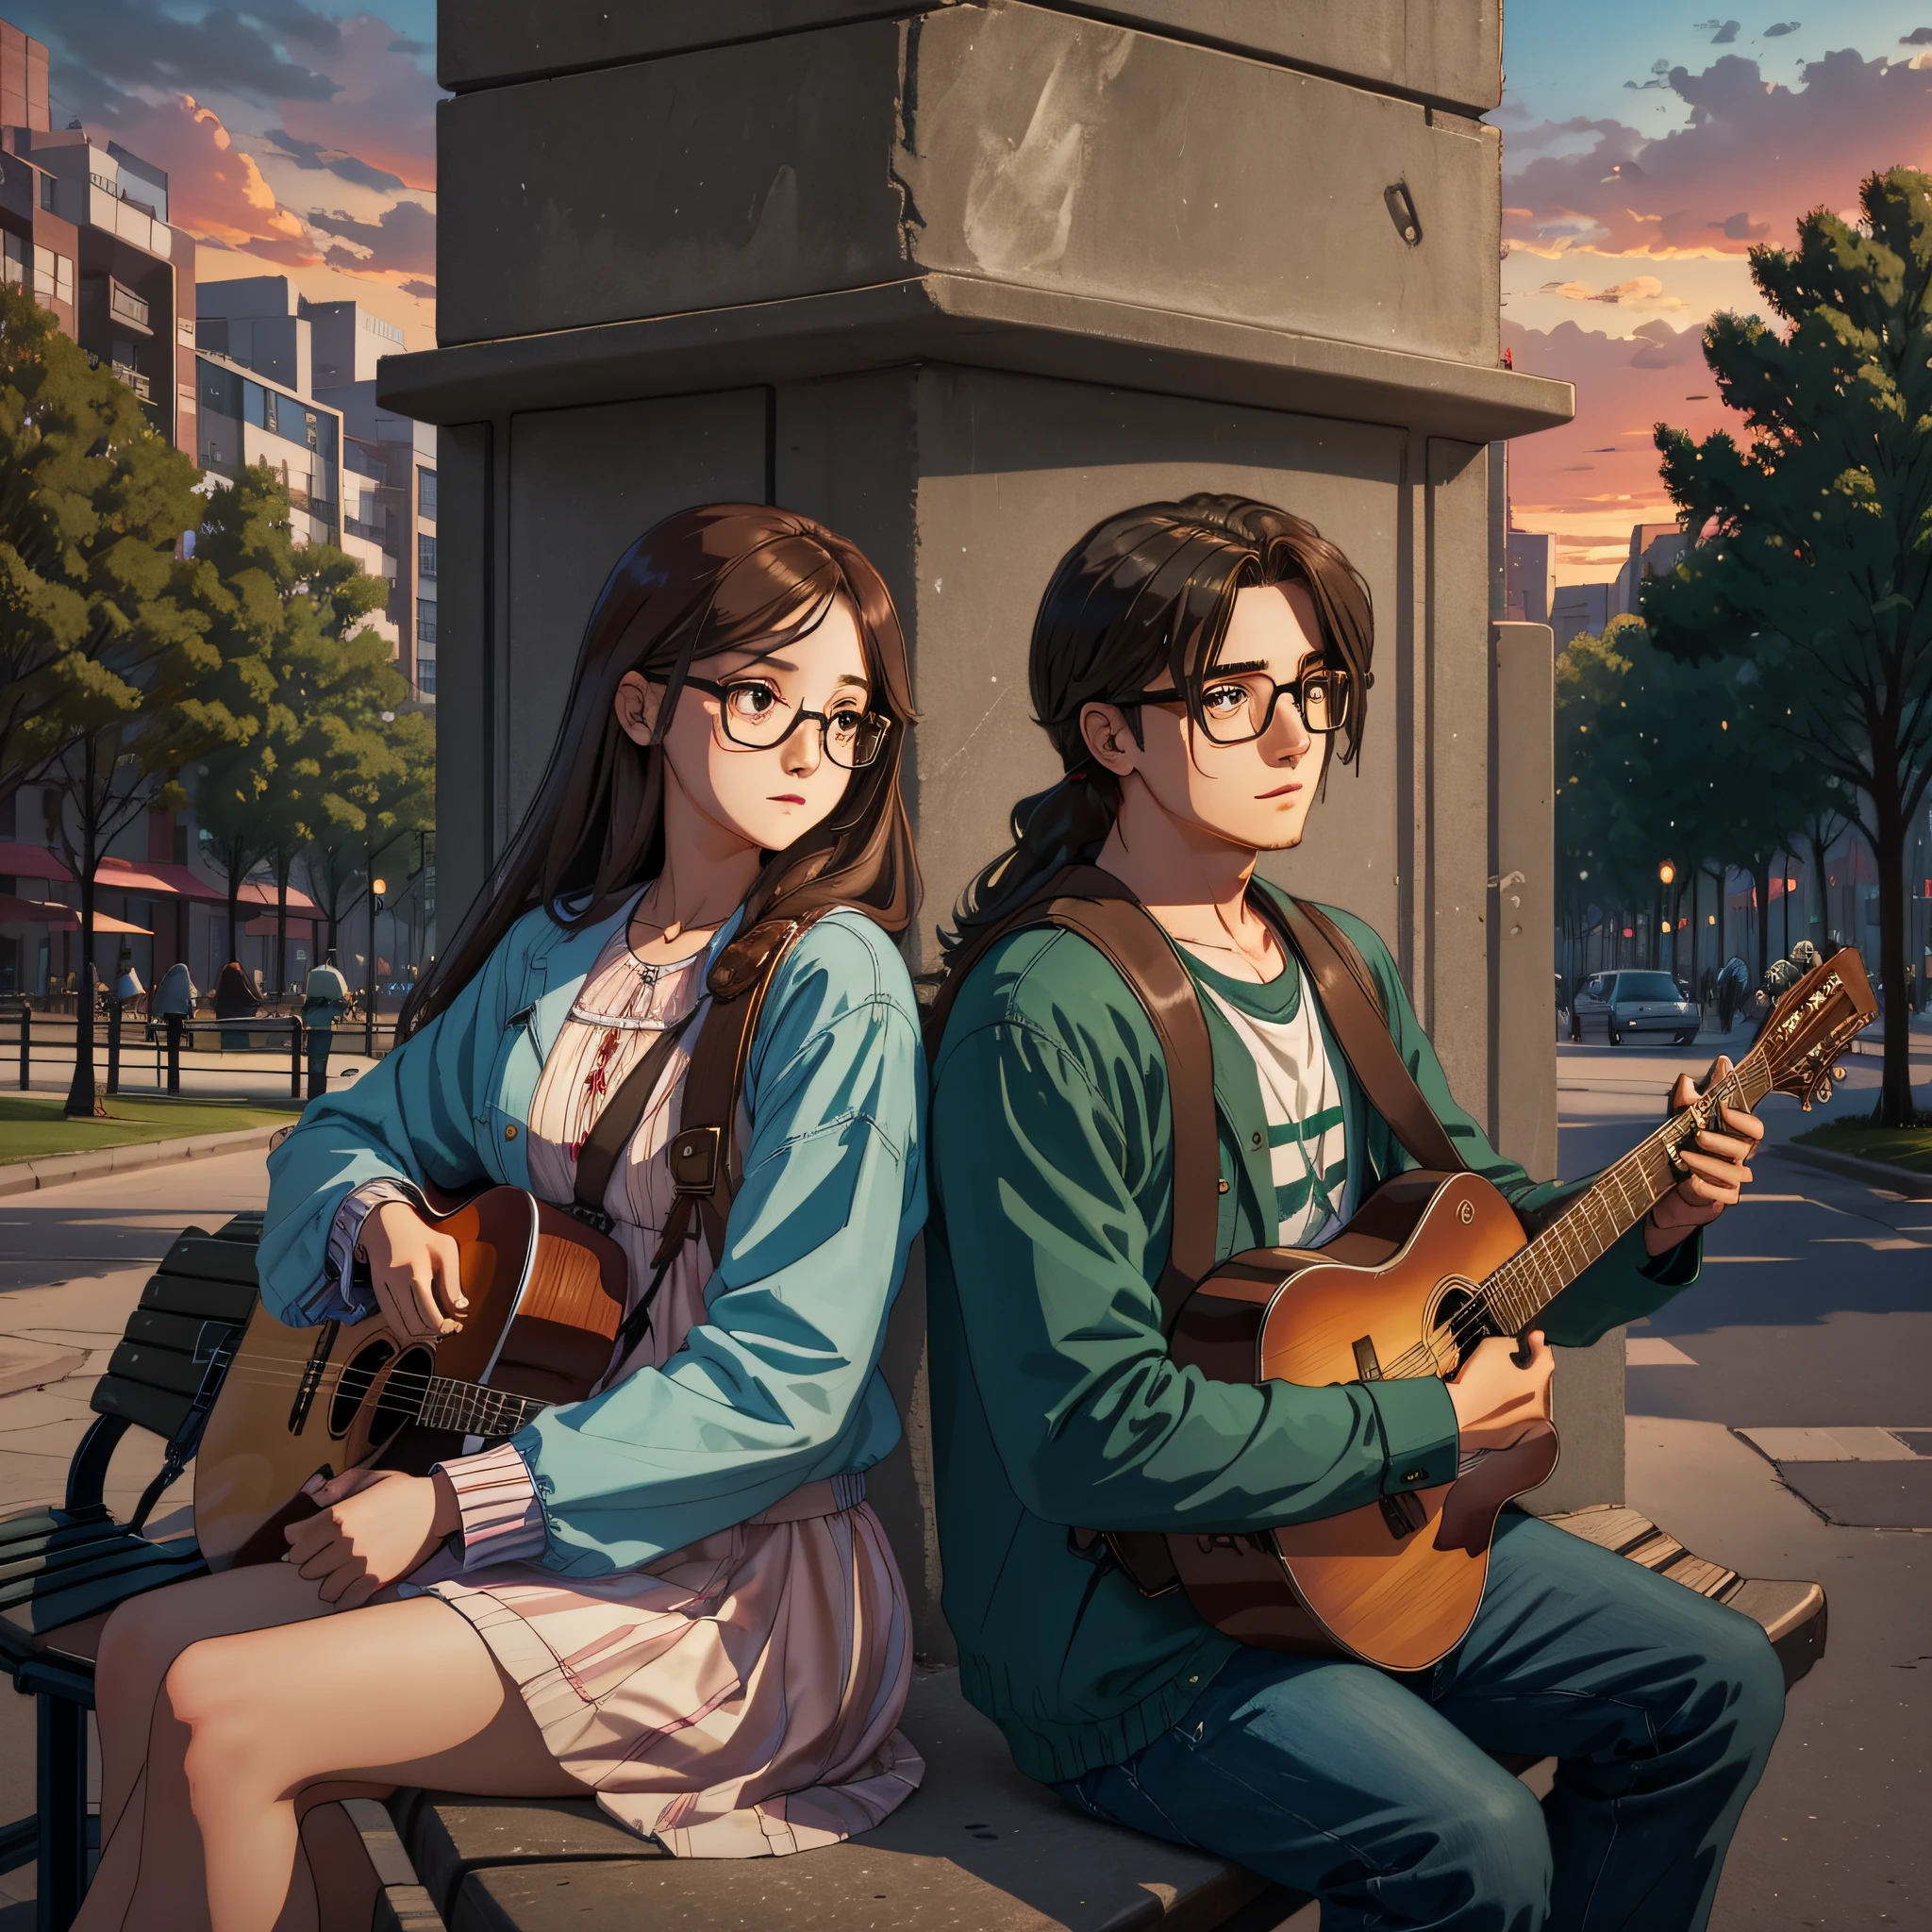 At dusk, a girl and a boy sitting on a park bench, girls dressed in long hair, boys with square-framed glasses, holding guitars --auto